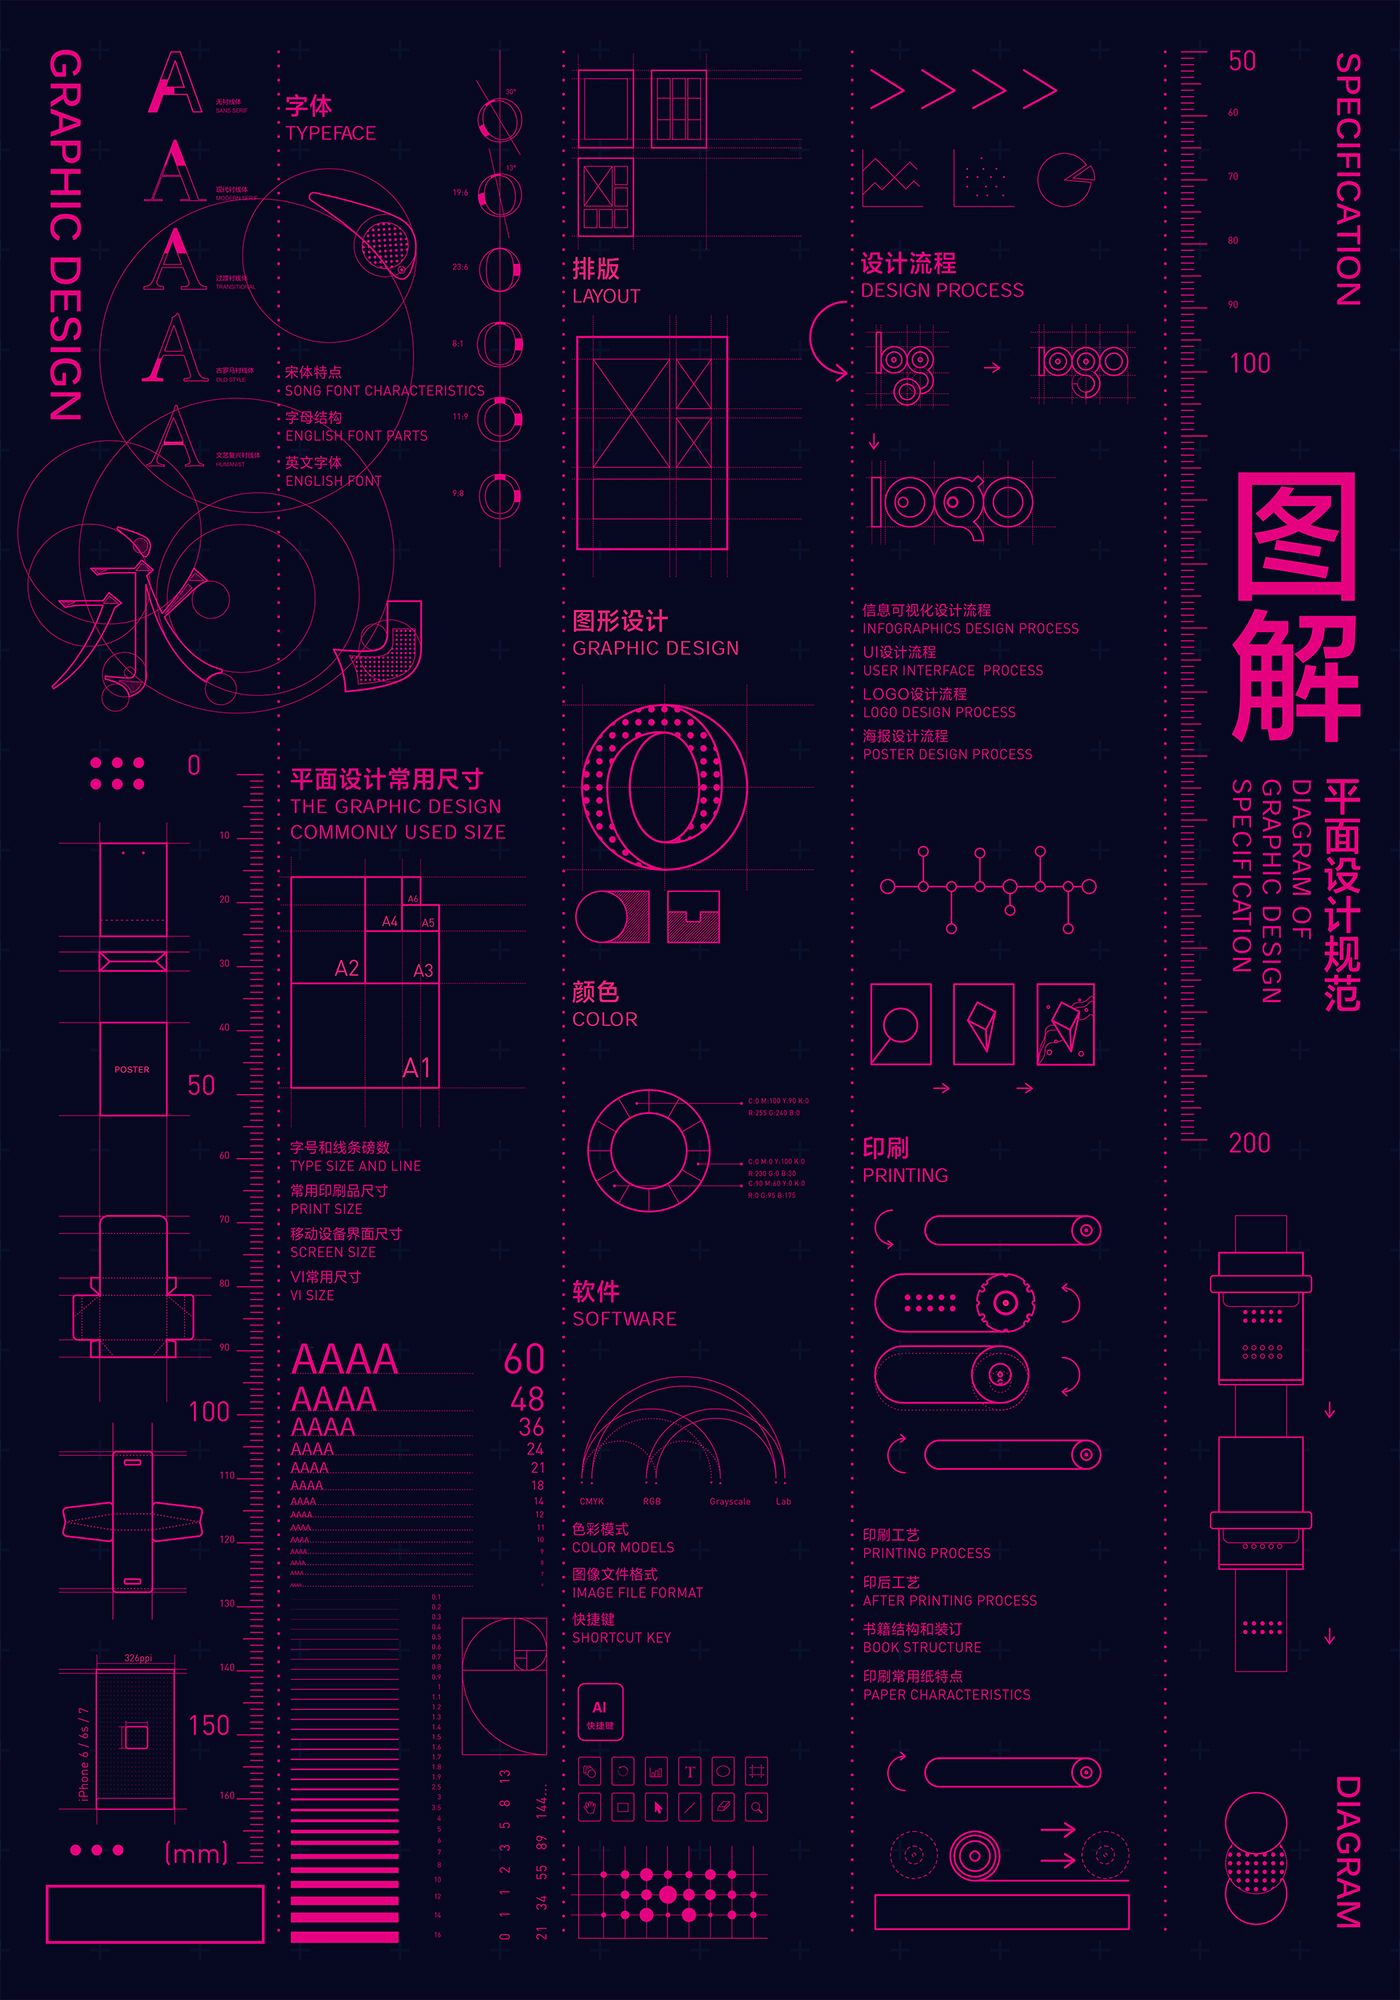 Diagram of Graphic Design Specification》 on Behance